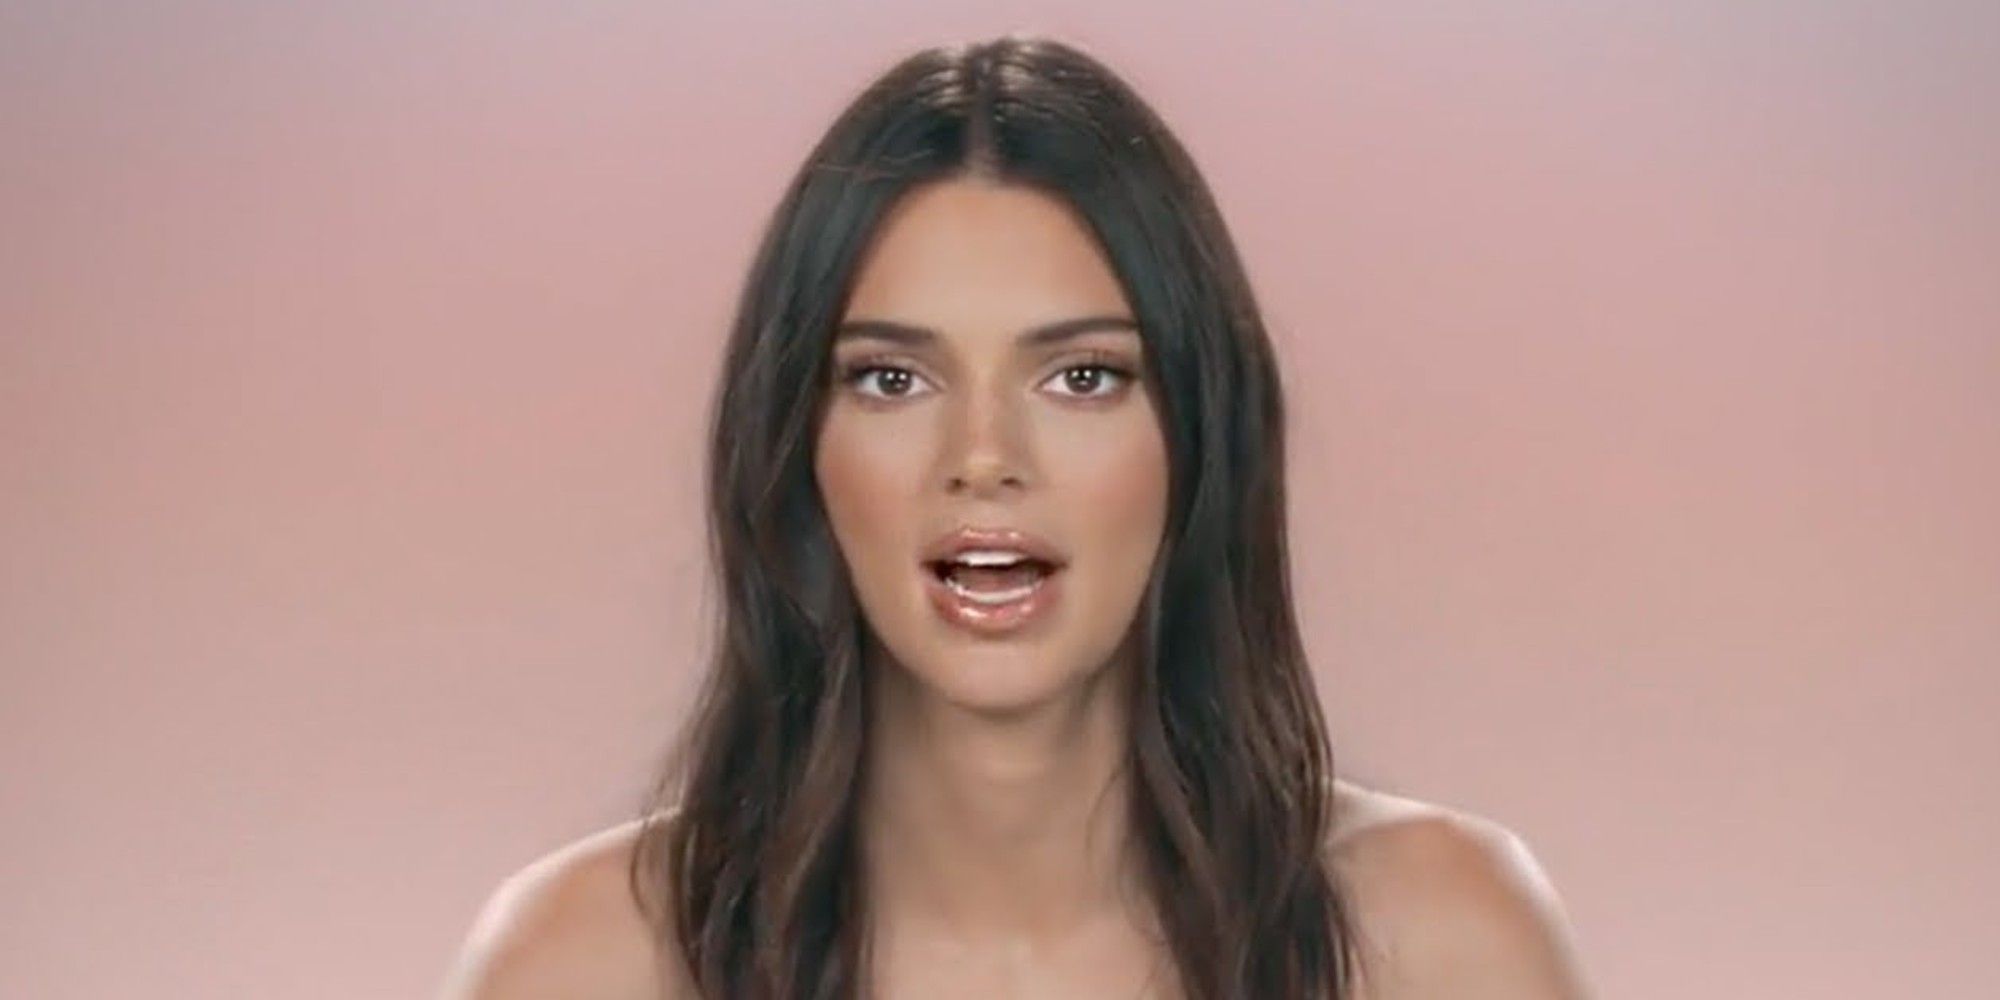 Kendall Jenner on Keeping Up With The Kardashians